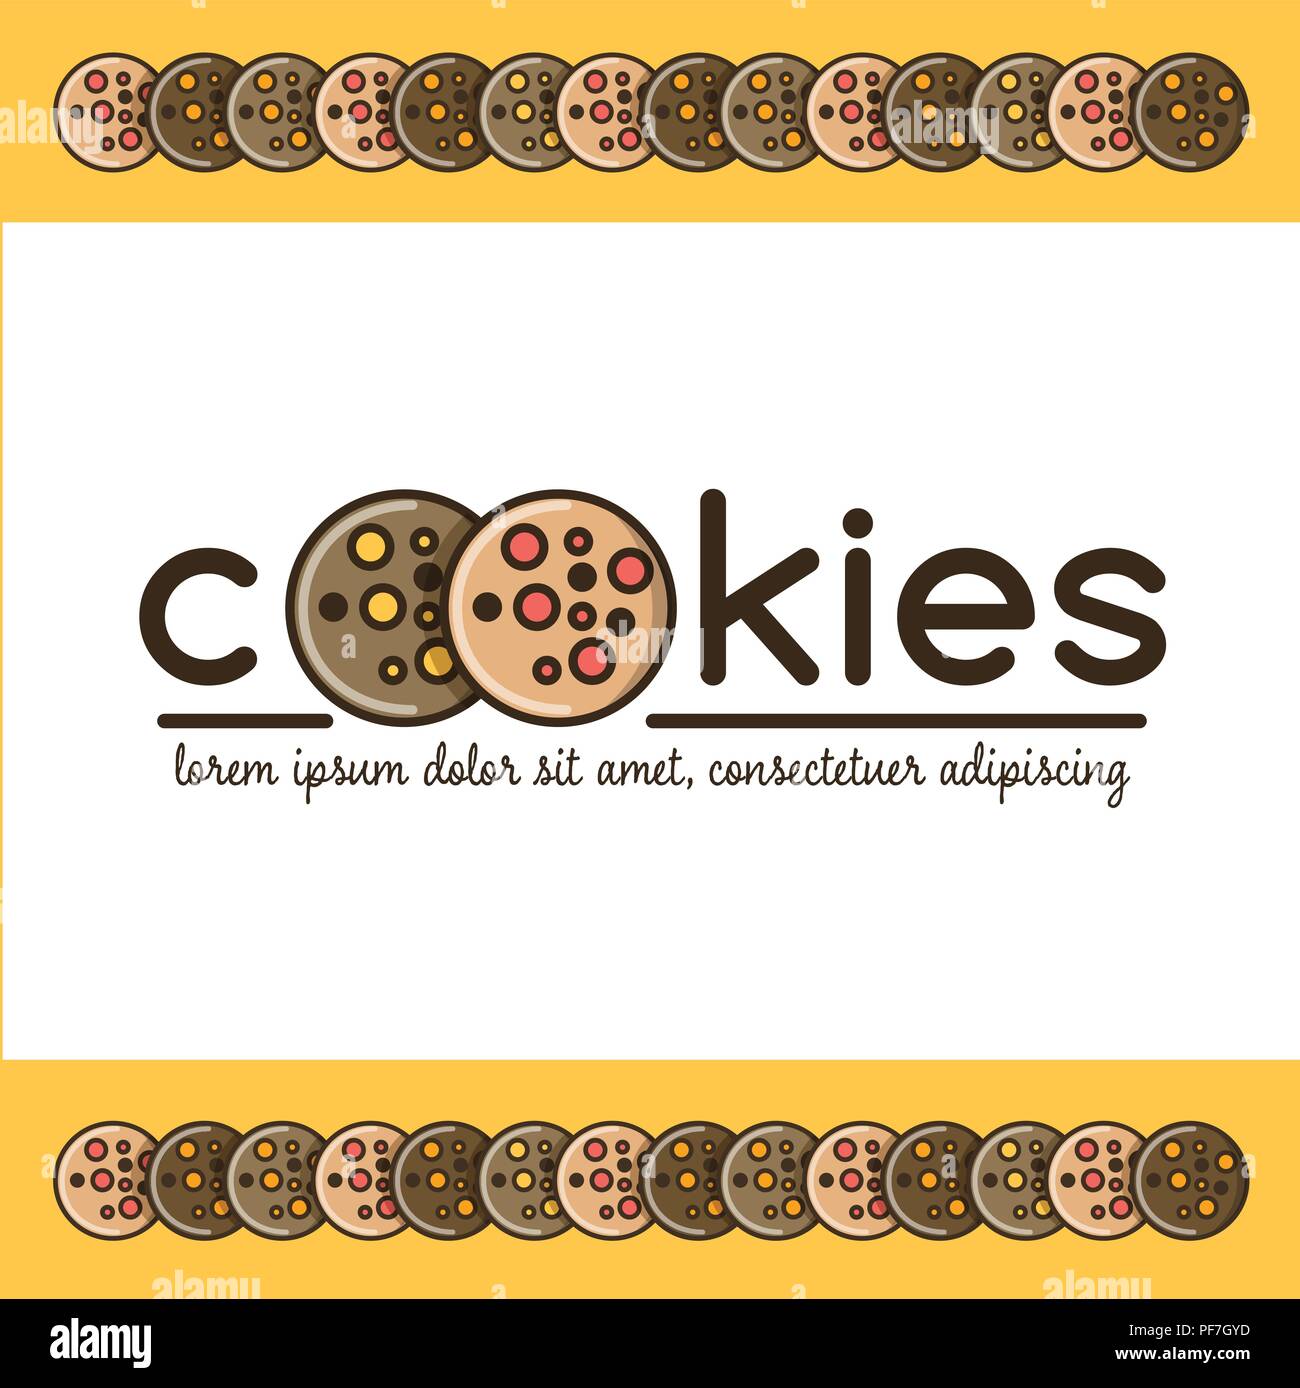 Food Logotype With Text Cookies And Image Of 2 Cookies Text